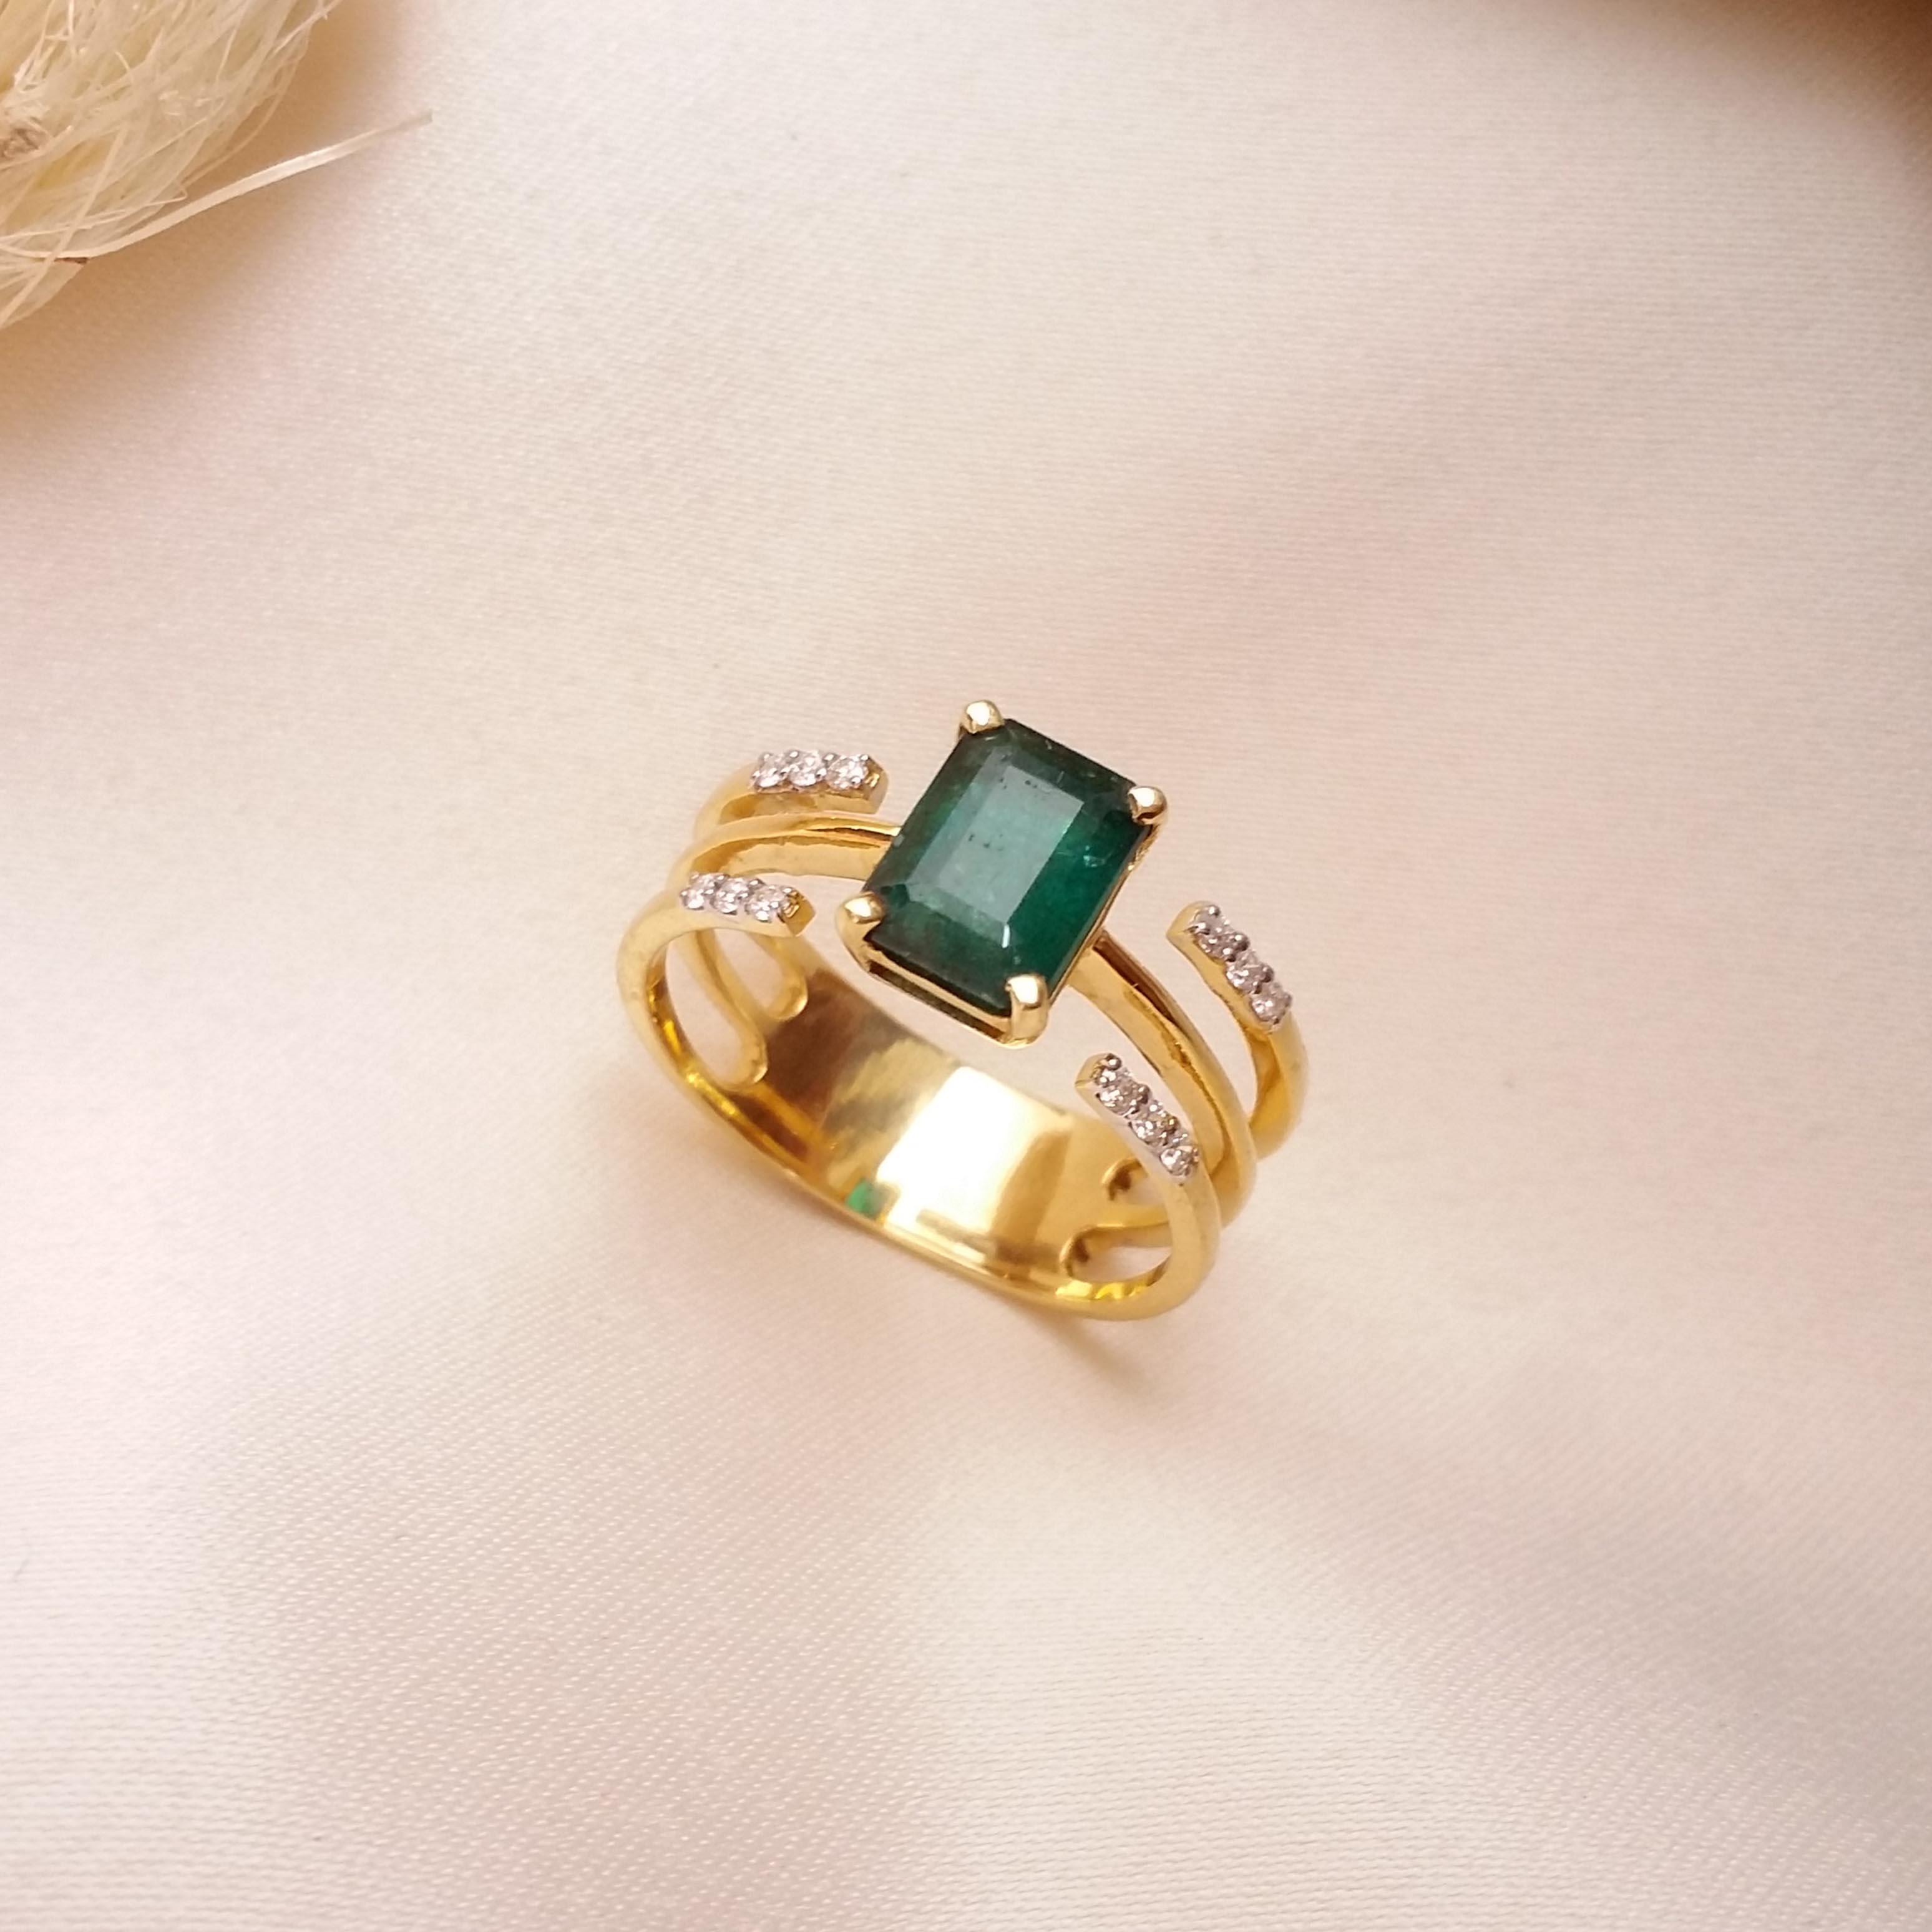 8.79 carat Old Mine Colombian Emerald and Diamond Ring – Ronald Abram